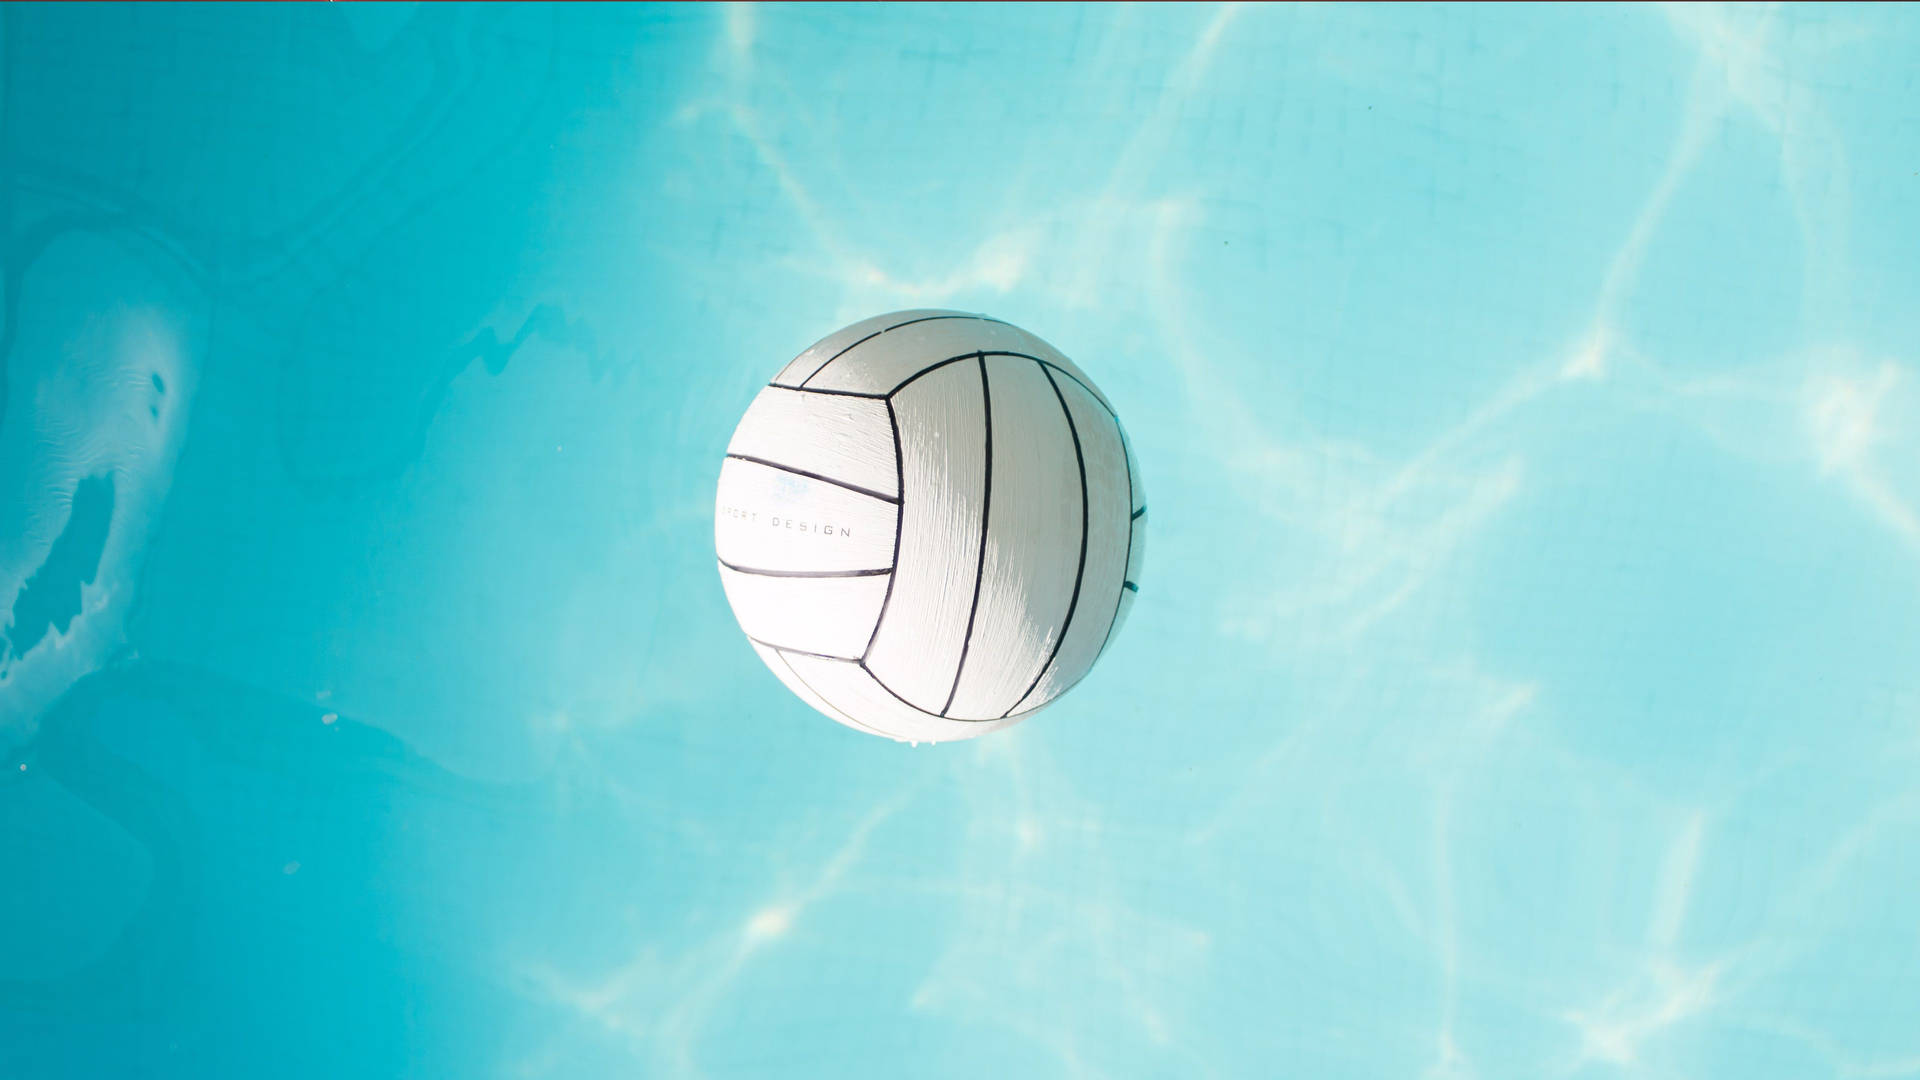 Volleyball On Swimming Pool Background